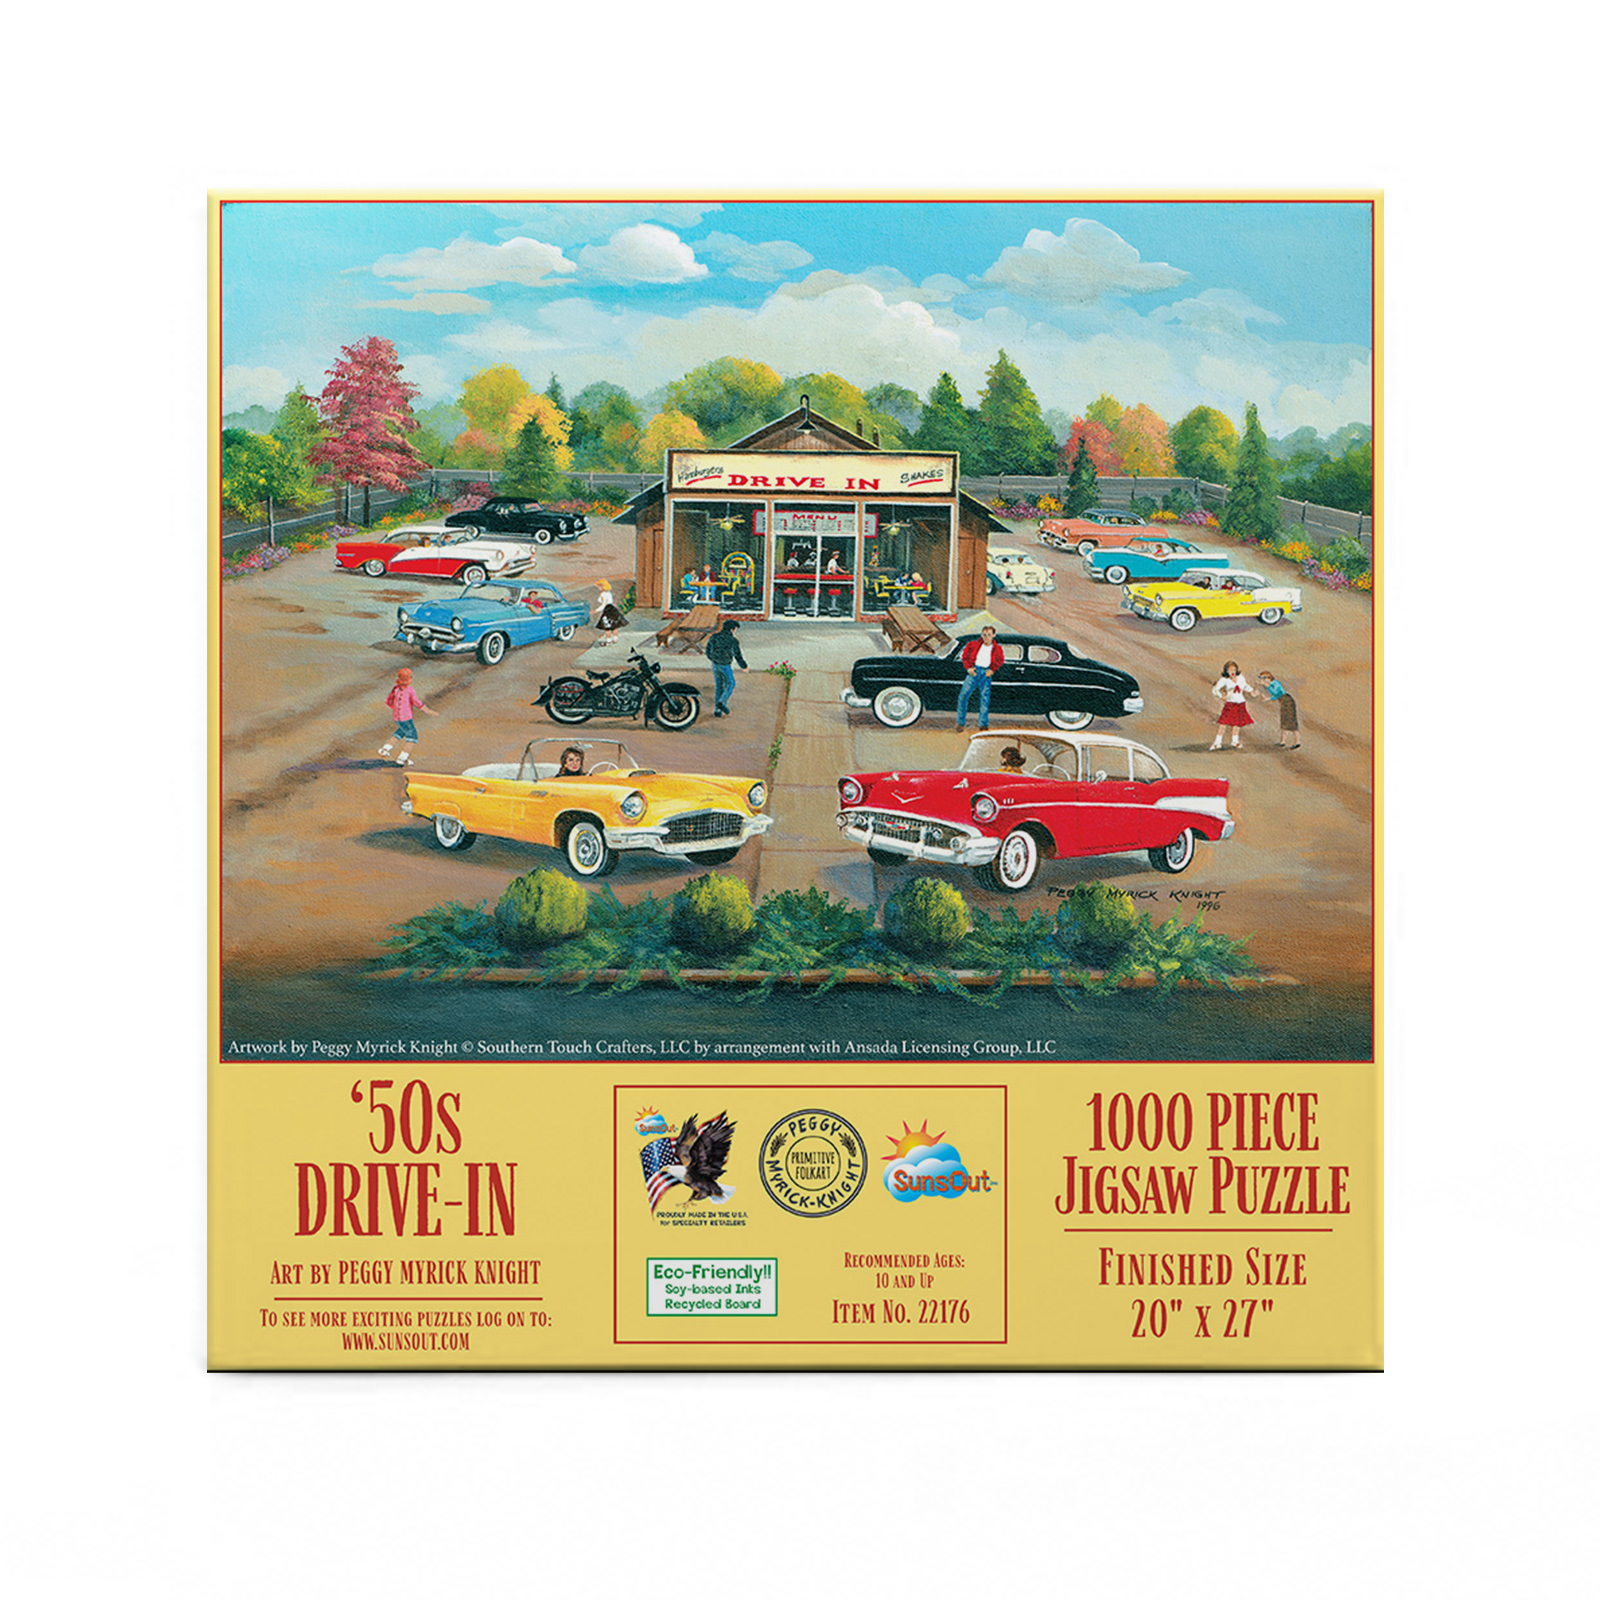 50's Drive-In